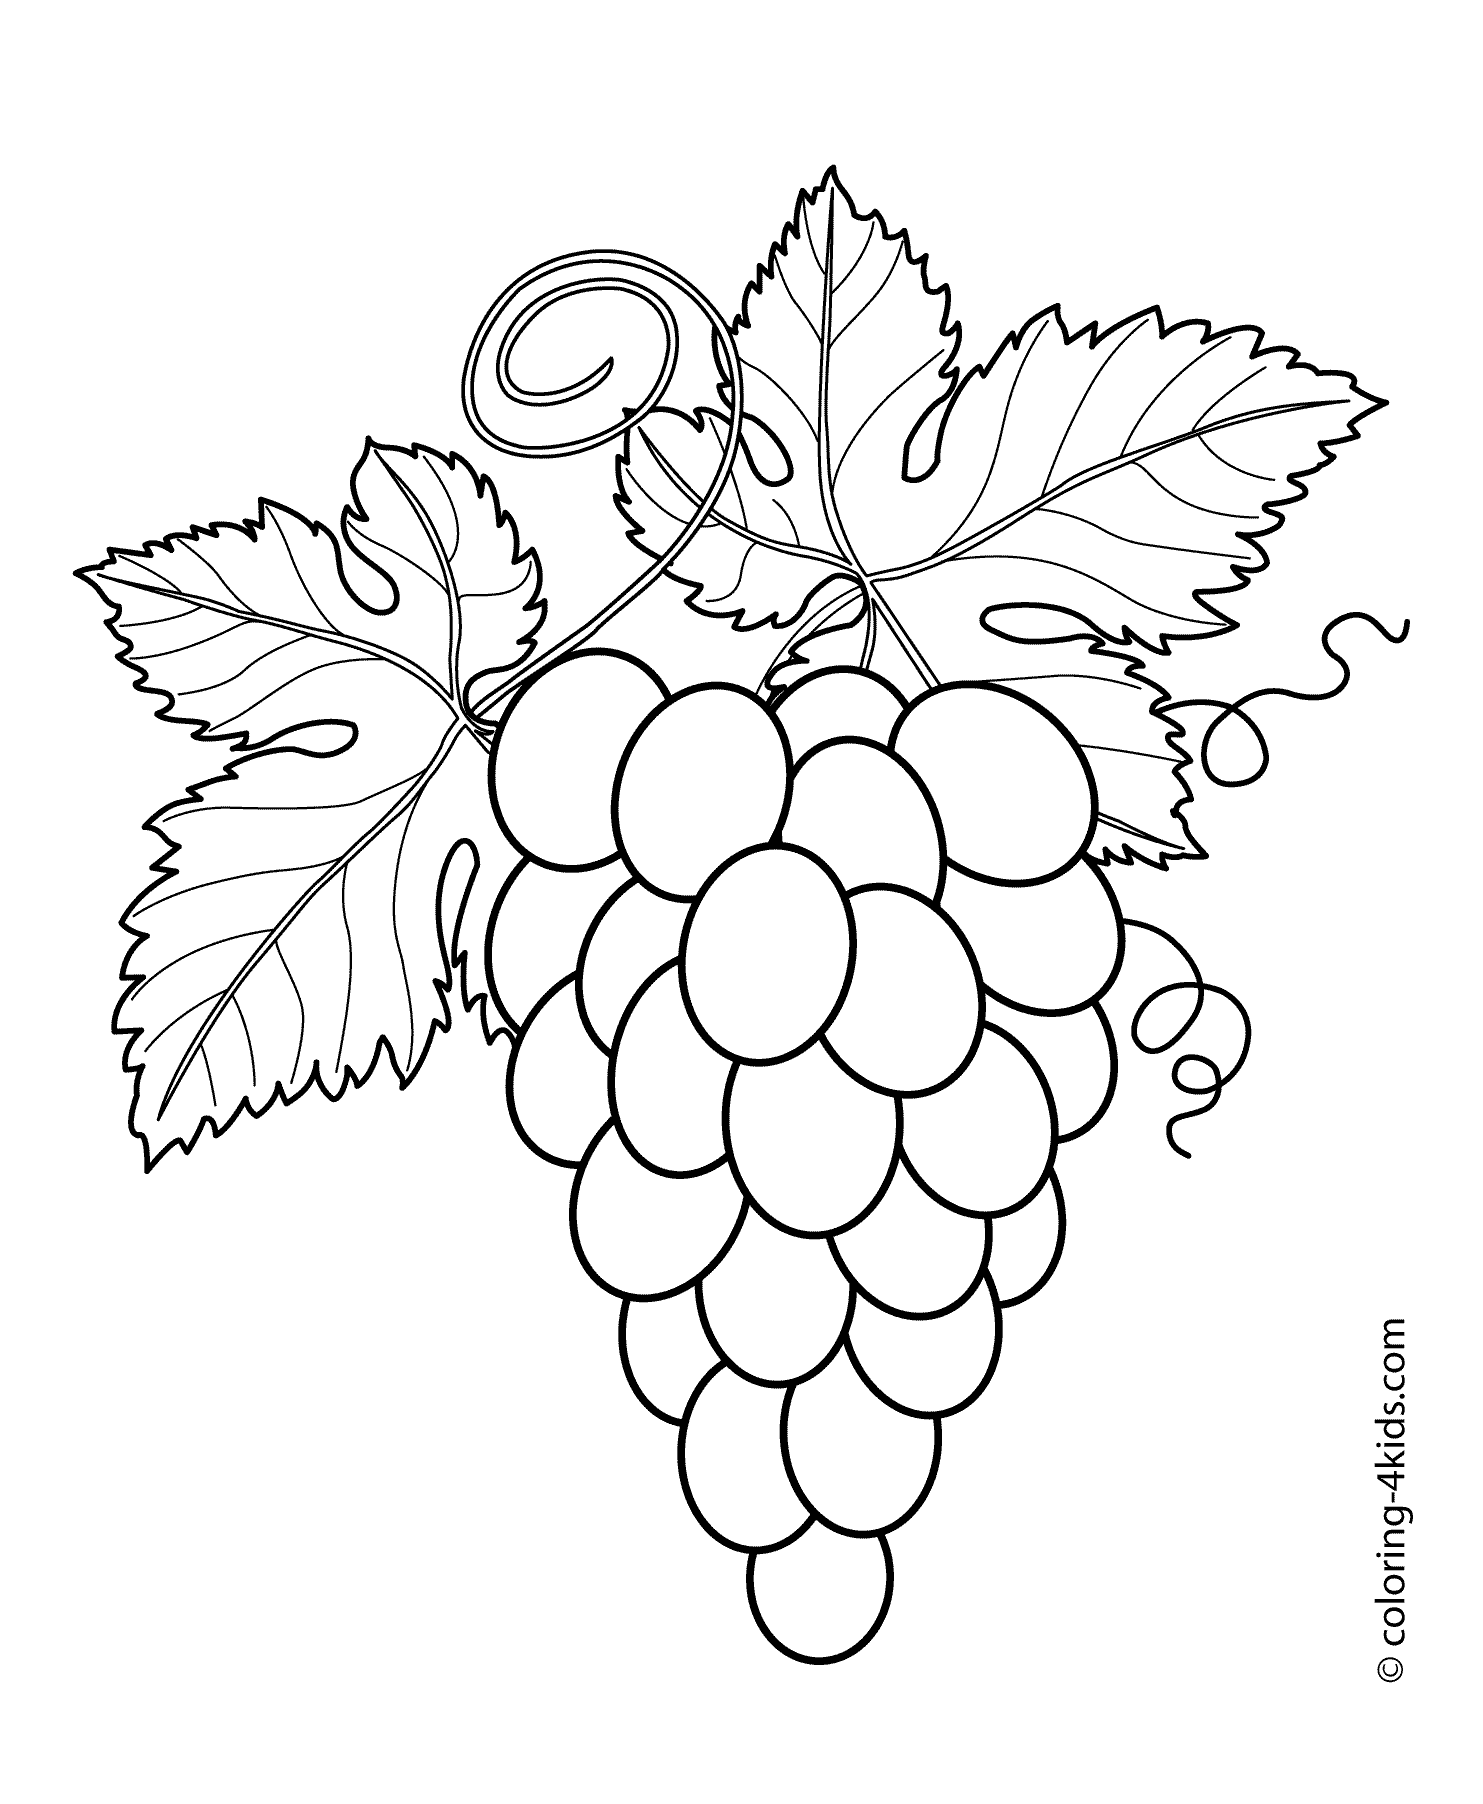 Bunch Of Grapes With Leaves Sketch Engraving Vector Illustration Scratch  Board Style Imitation Hand Drawn Image Royalty Free SVG Cliparts  Vectors And Stock Illustration Image 122811962